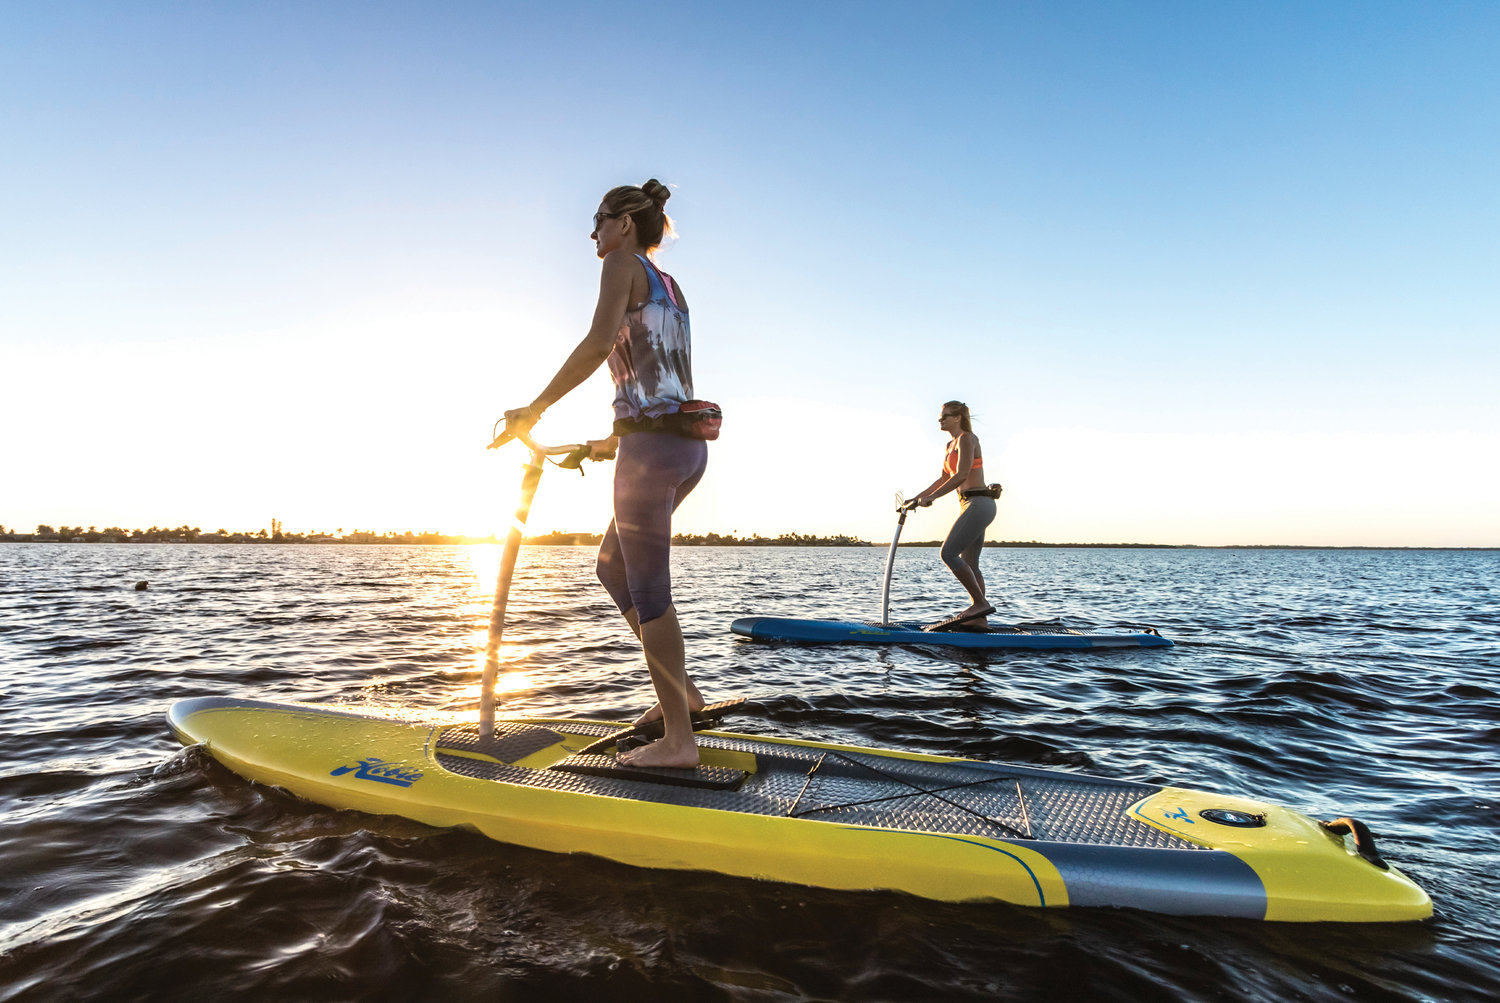 The Kayak Centre also offers SUP rentals and lessons, and leads sunset tours